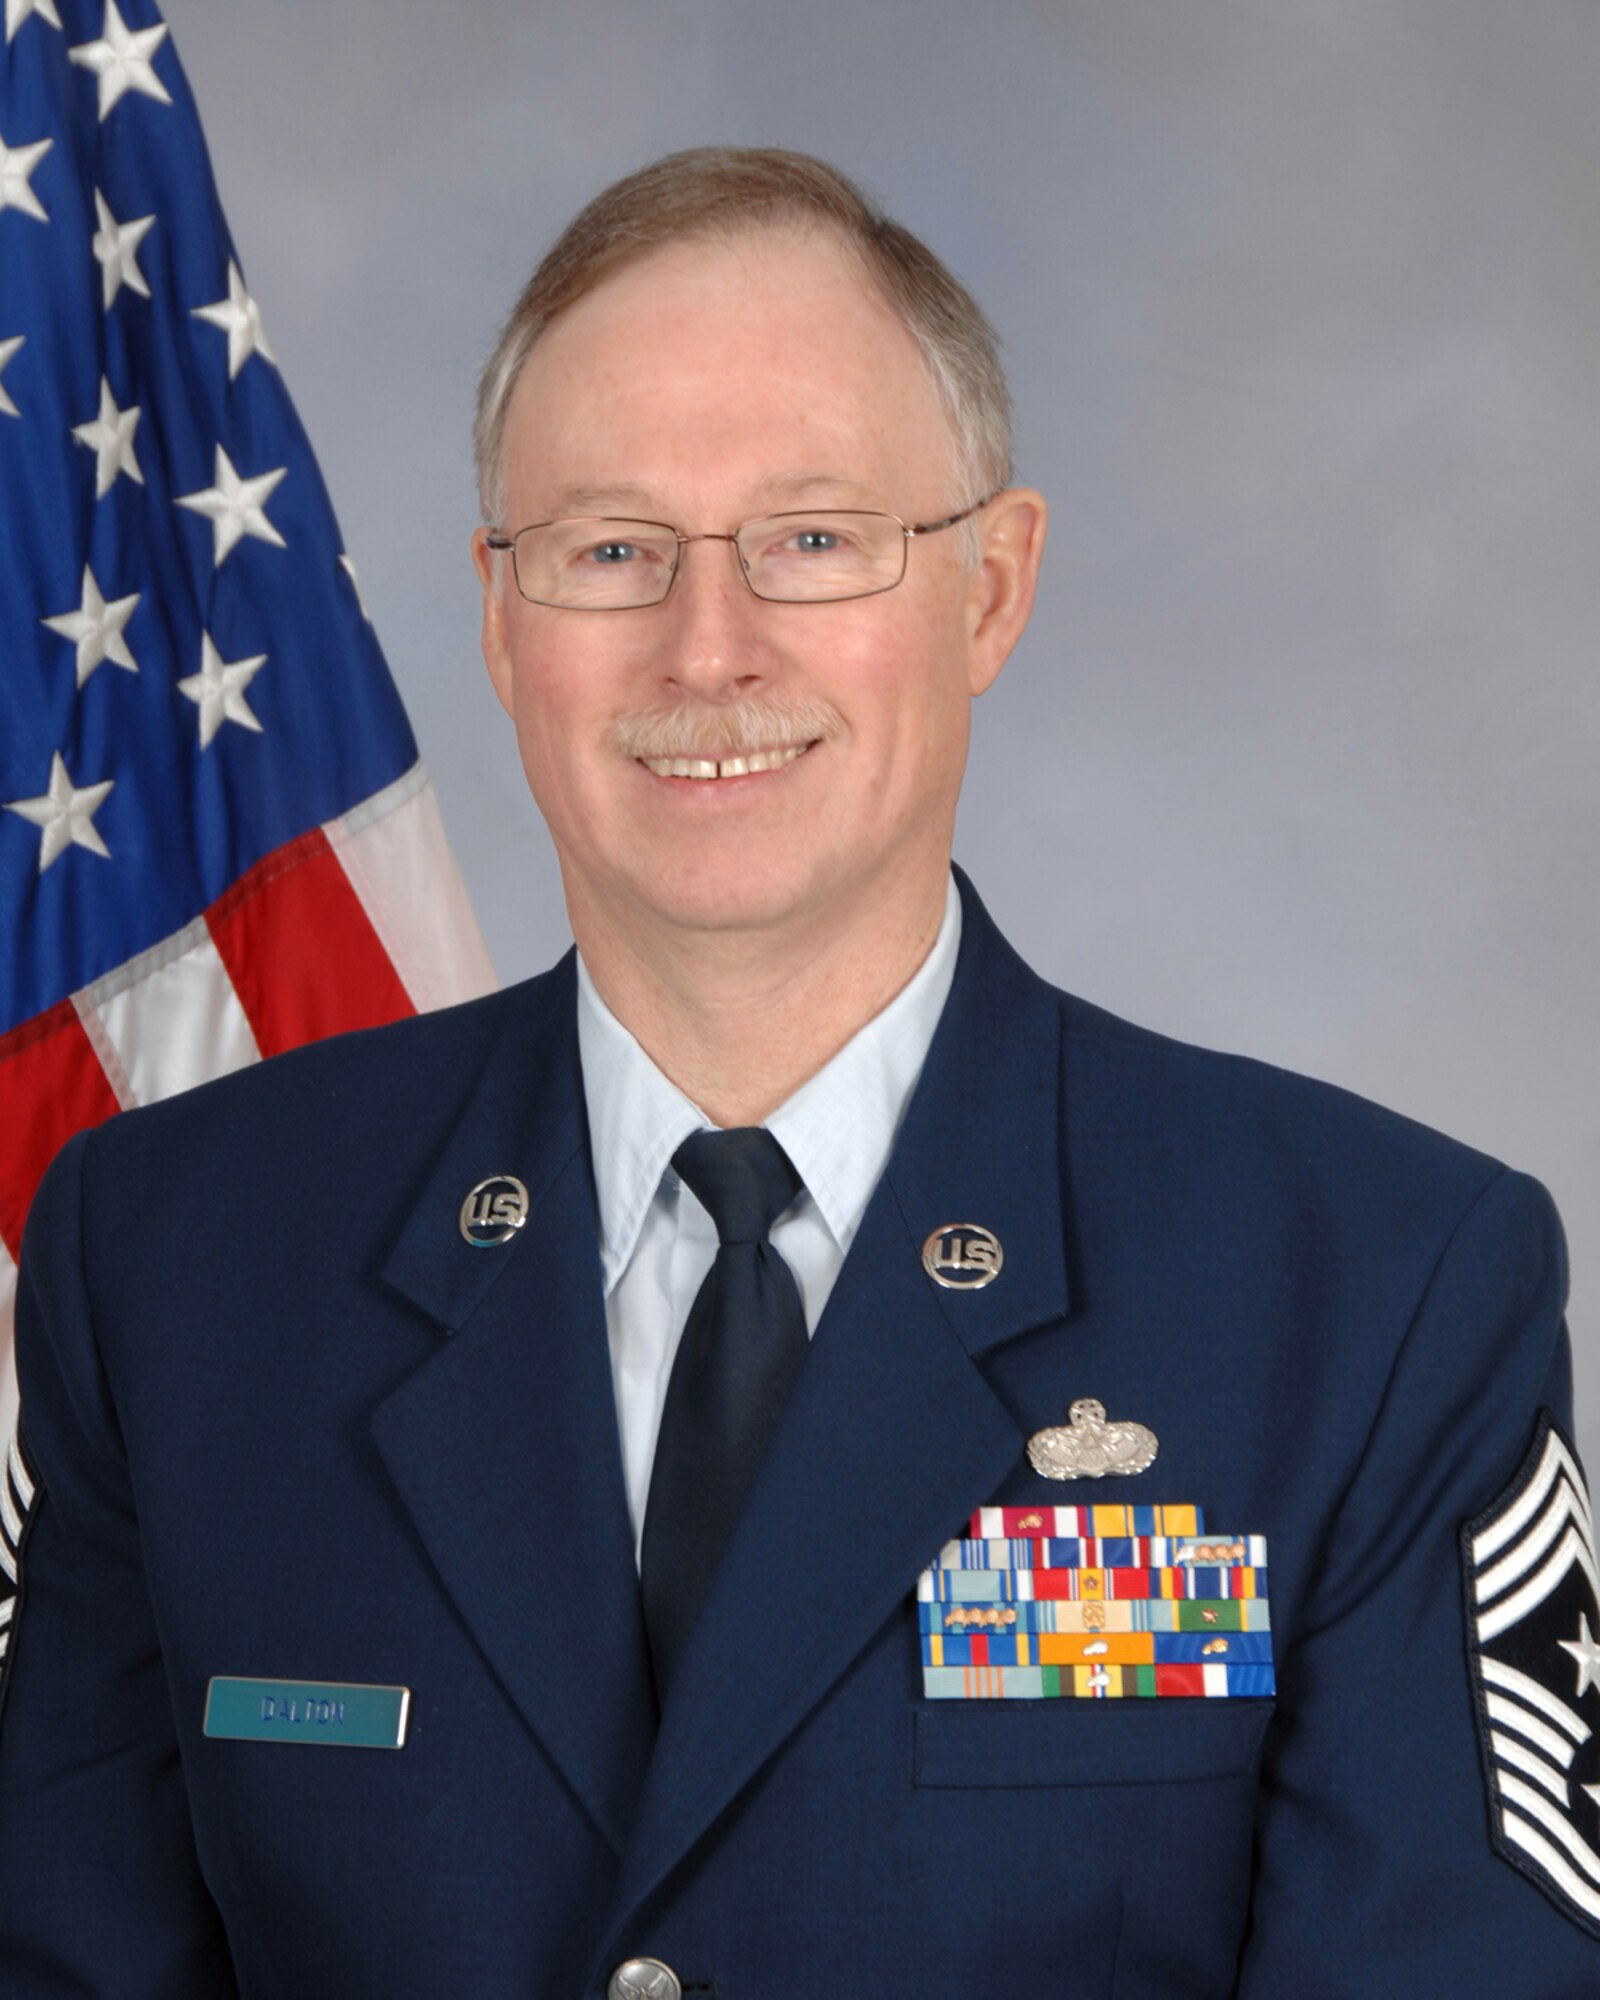 Chief Master Sgt. Michael Dalton, the state command chief for the Michigan Air National Guard, plans to retire, effective Jan. 1, 2012.